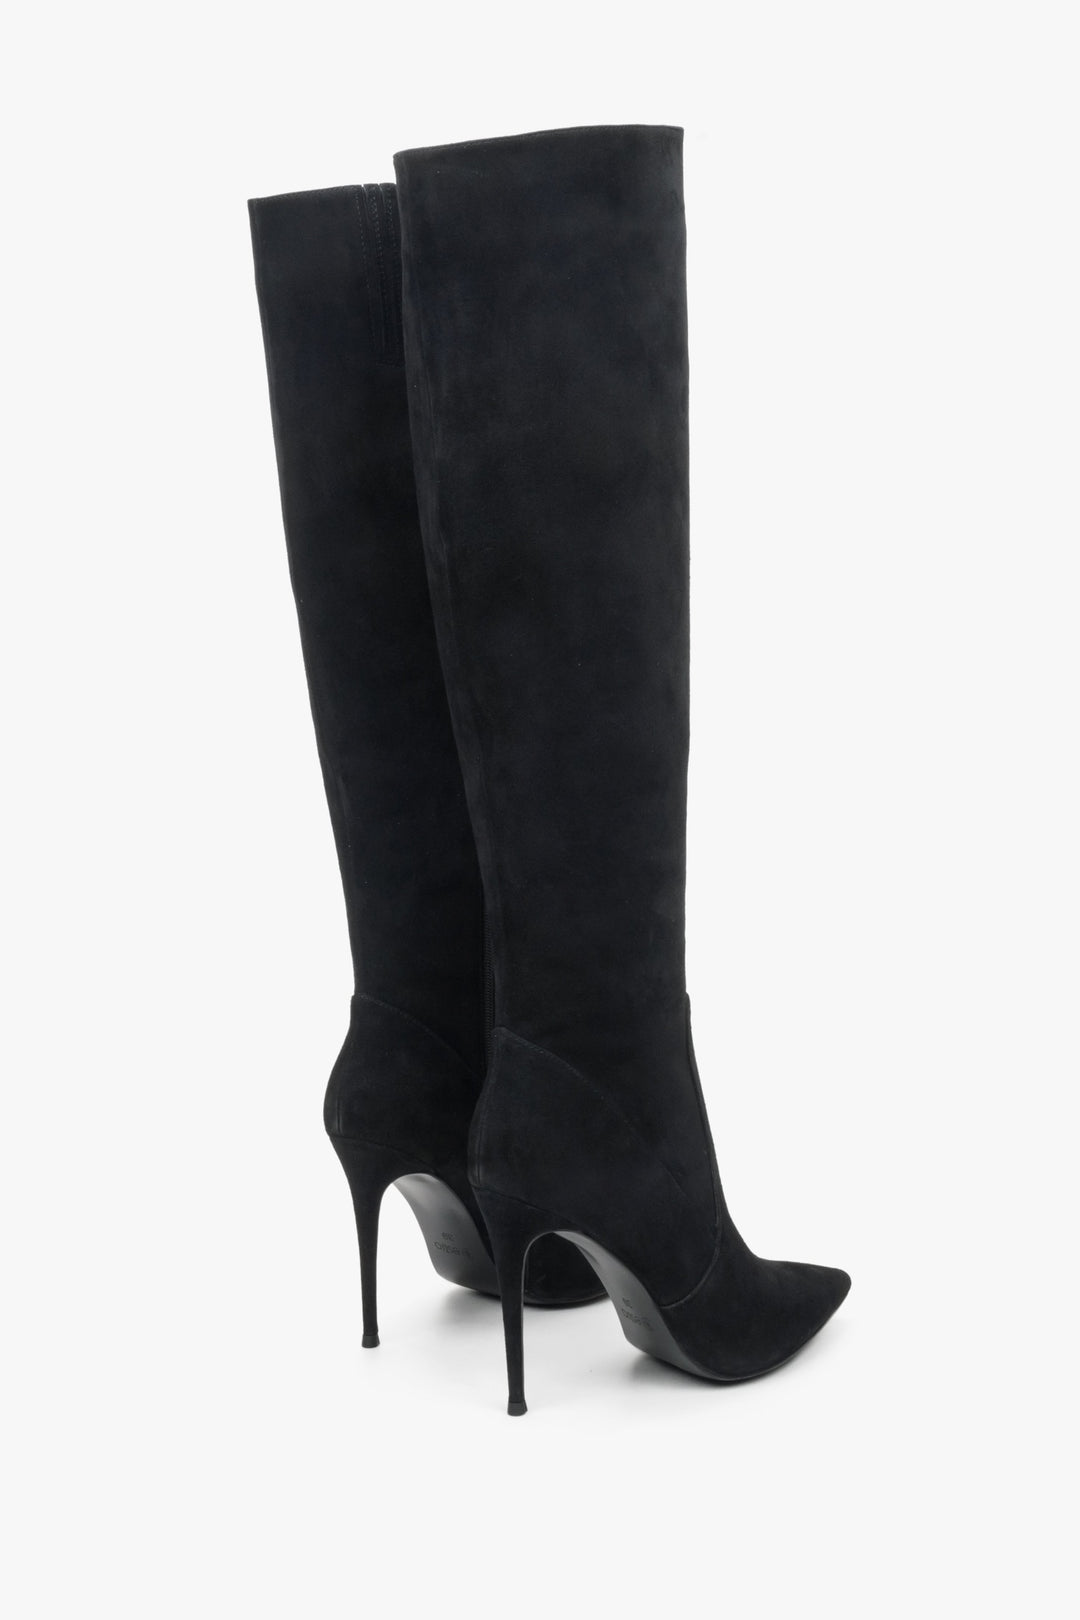 Women's black velour stretchy boots.